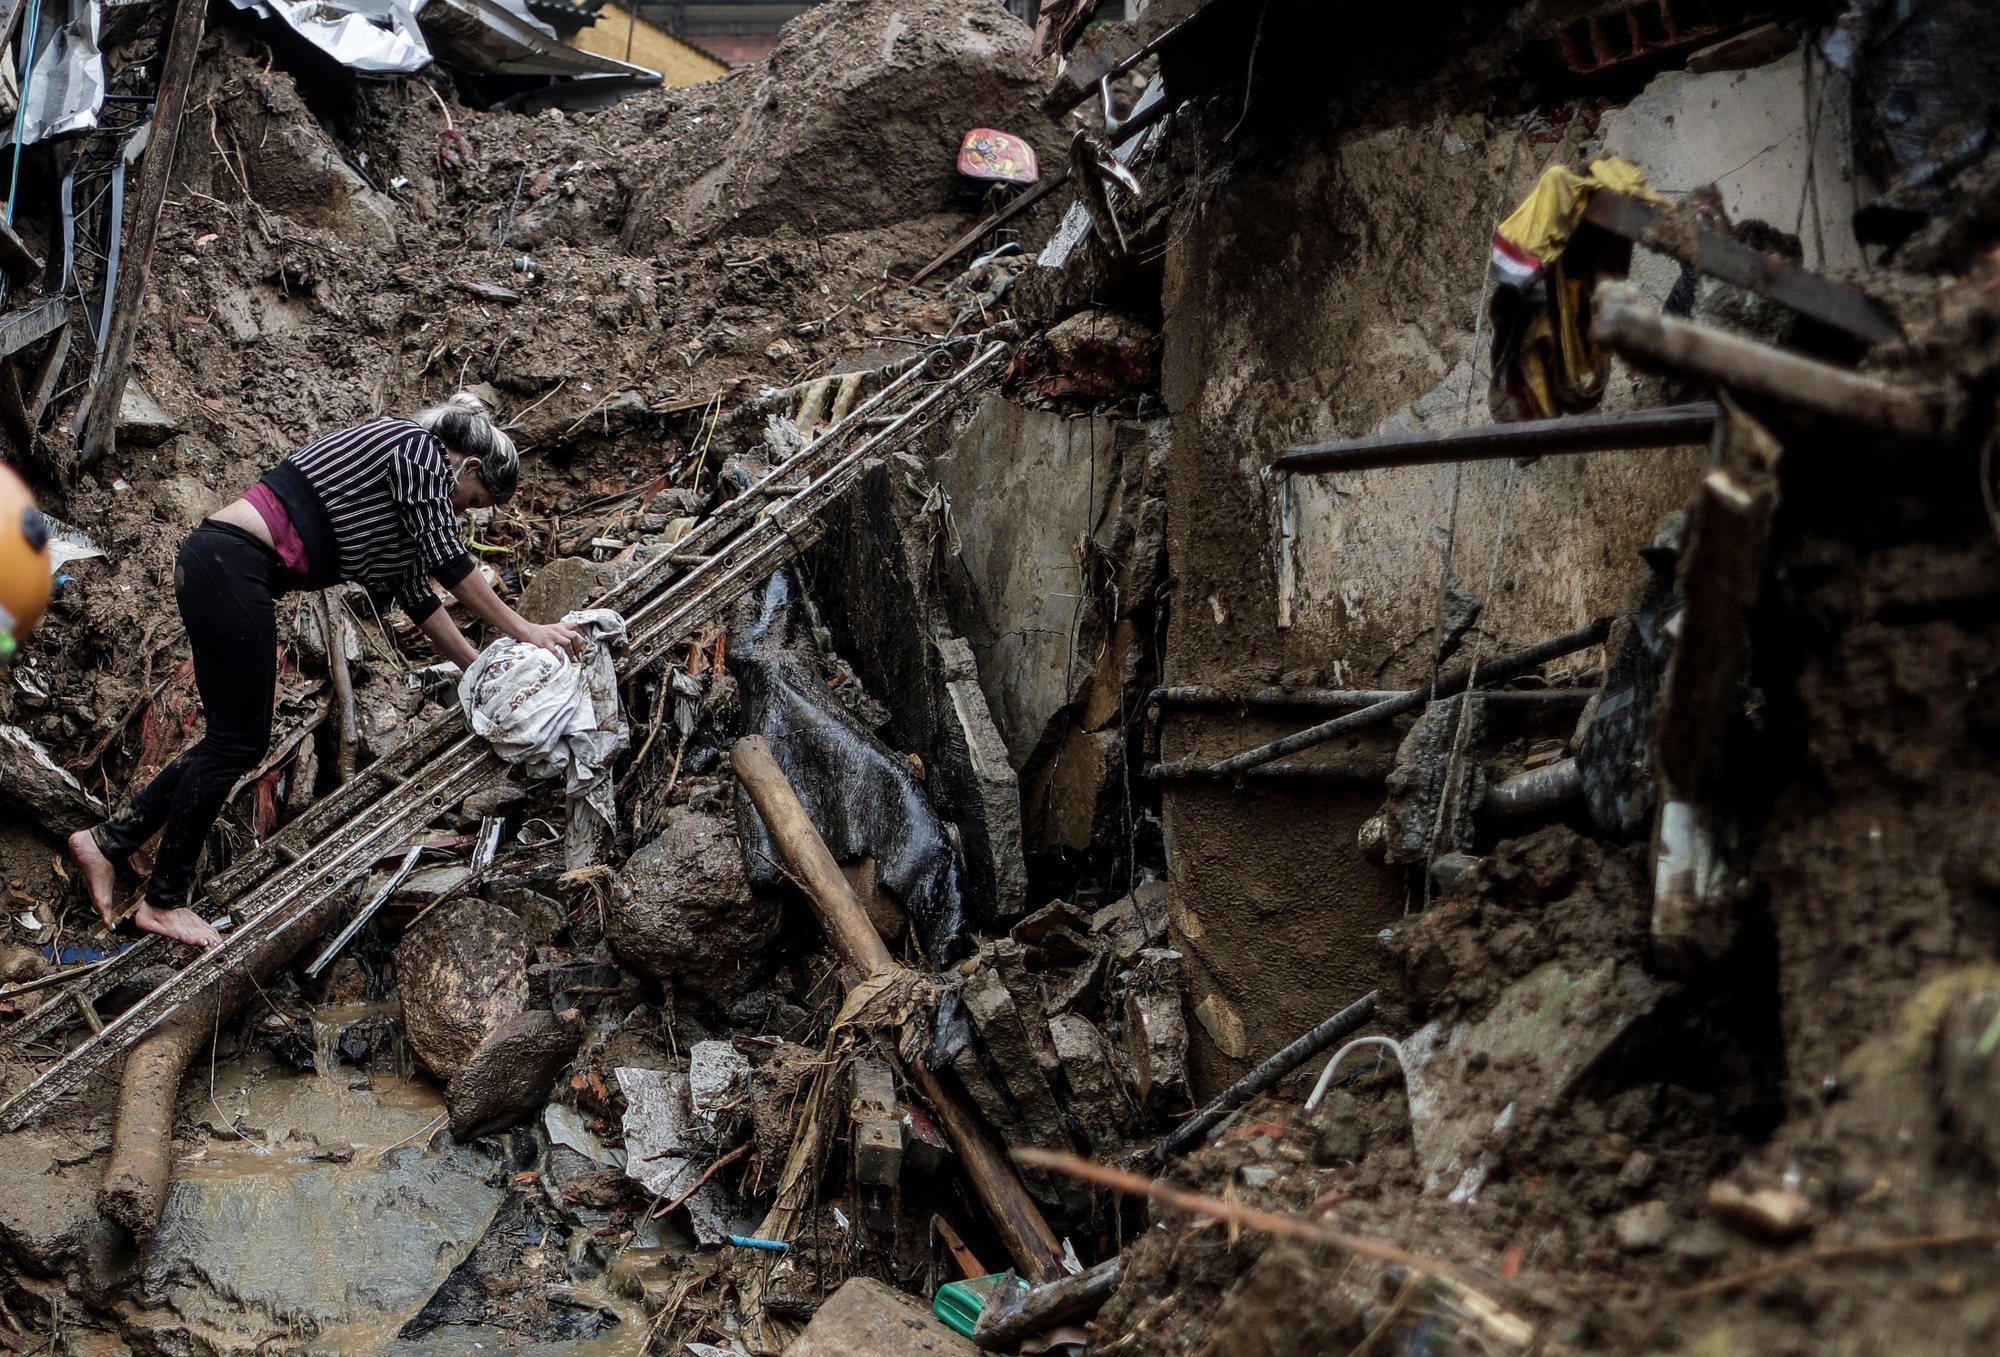 epa09763778 A woman tries to walk on the rubble left by heavy rains, in Petropolis, Brazil, 16 February 2022. Petropolis was devastated by the rains that have left more than fifty dead, thousands of homeless people and an unknown number of disappeared.  EPA/Antonio Lacerda